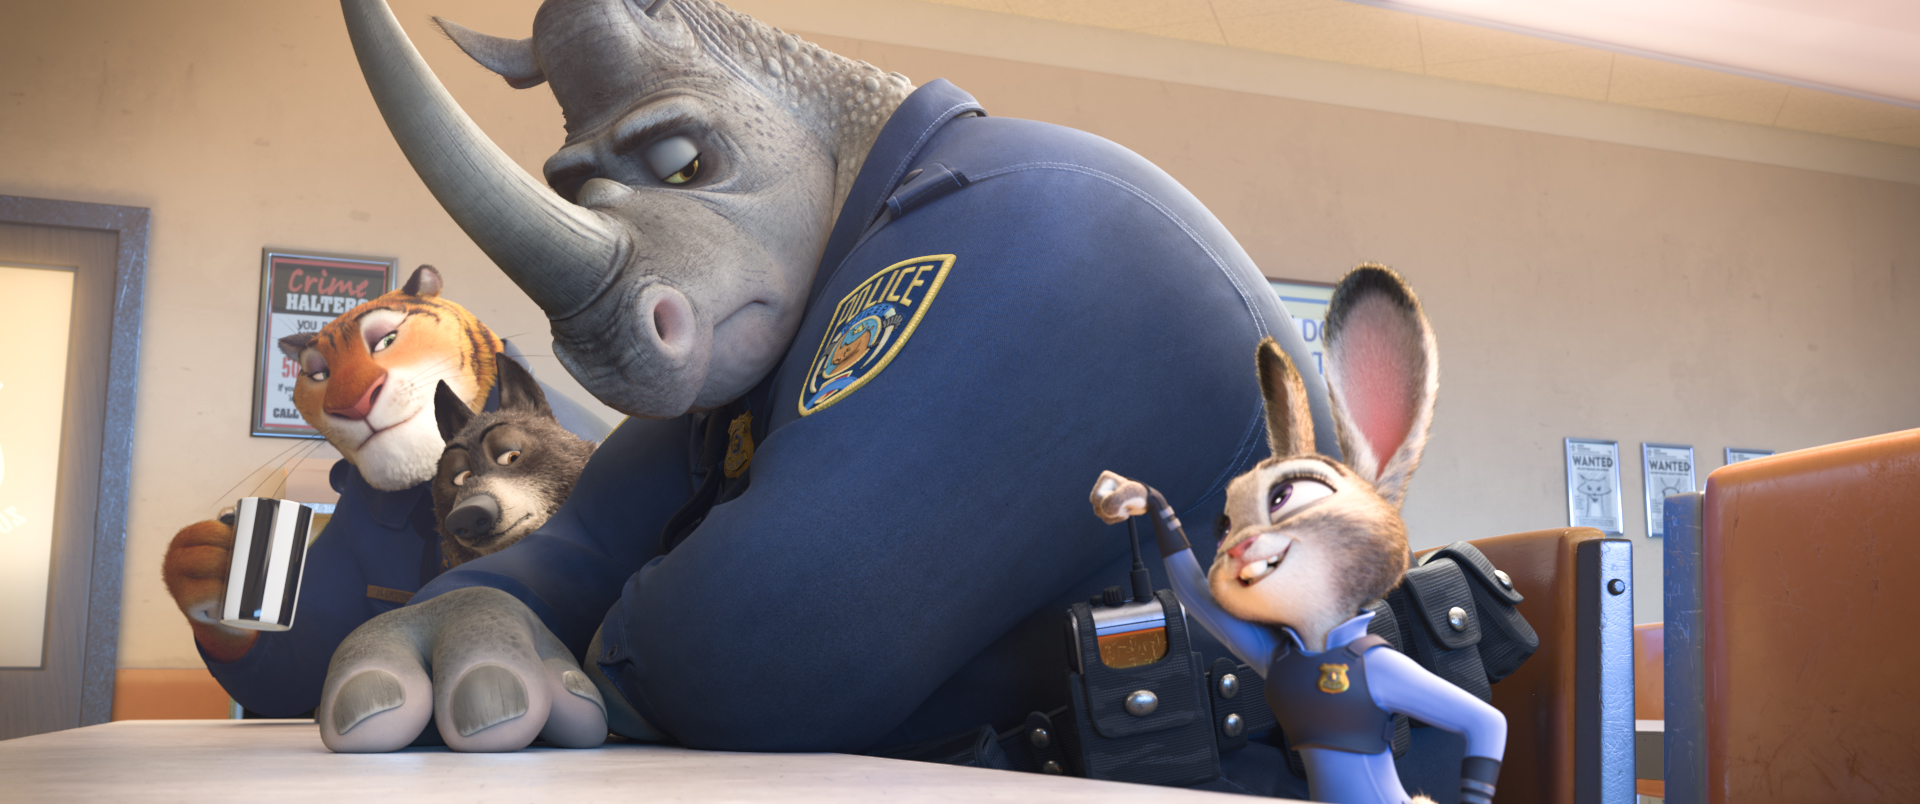 ZOOTOPIA – Pictured: Judy Hopps. ©2016 Disney. All Rights Reserved.